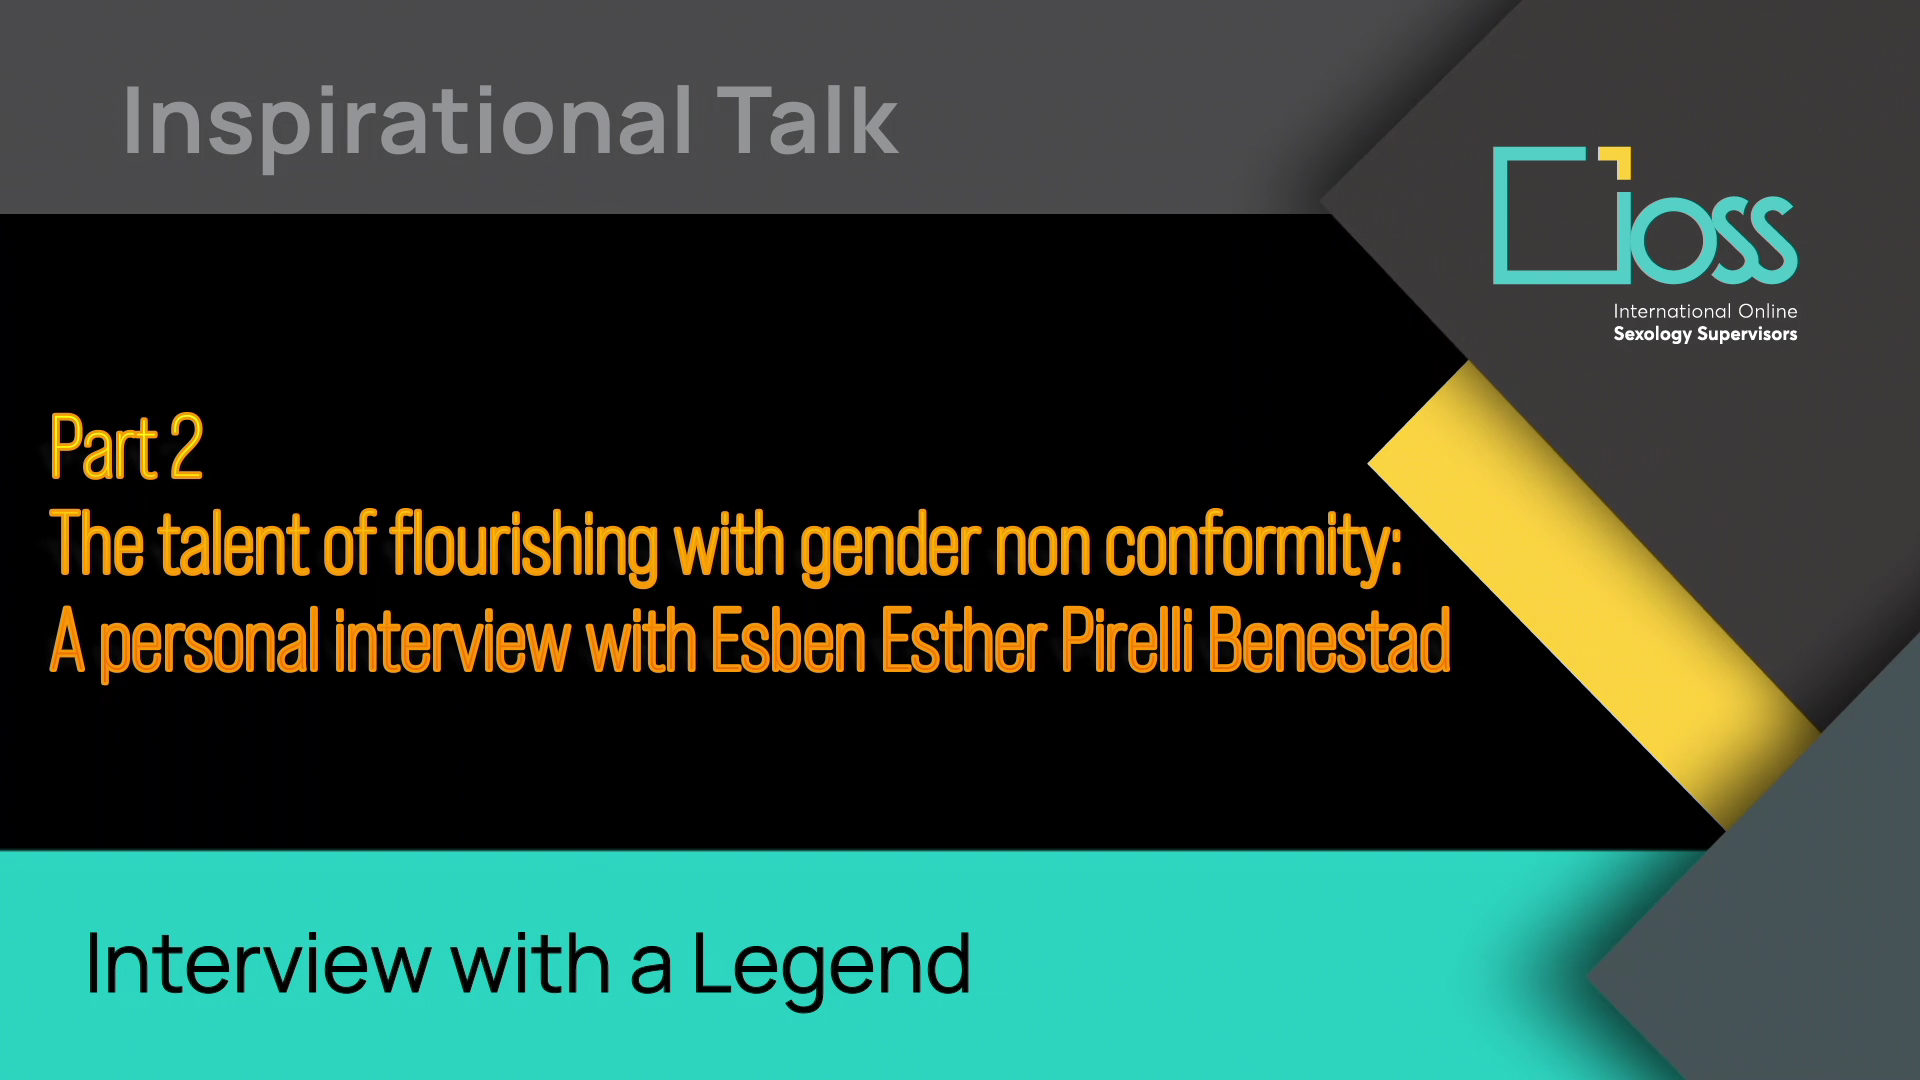 Part 2 The talent of flourishing with gender non conformity: A personal interview with Esben Esther Pirelli Benestad (Part 1 & 2)